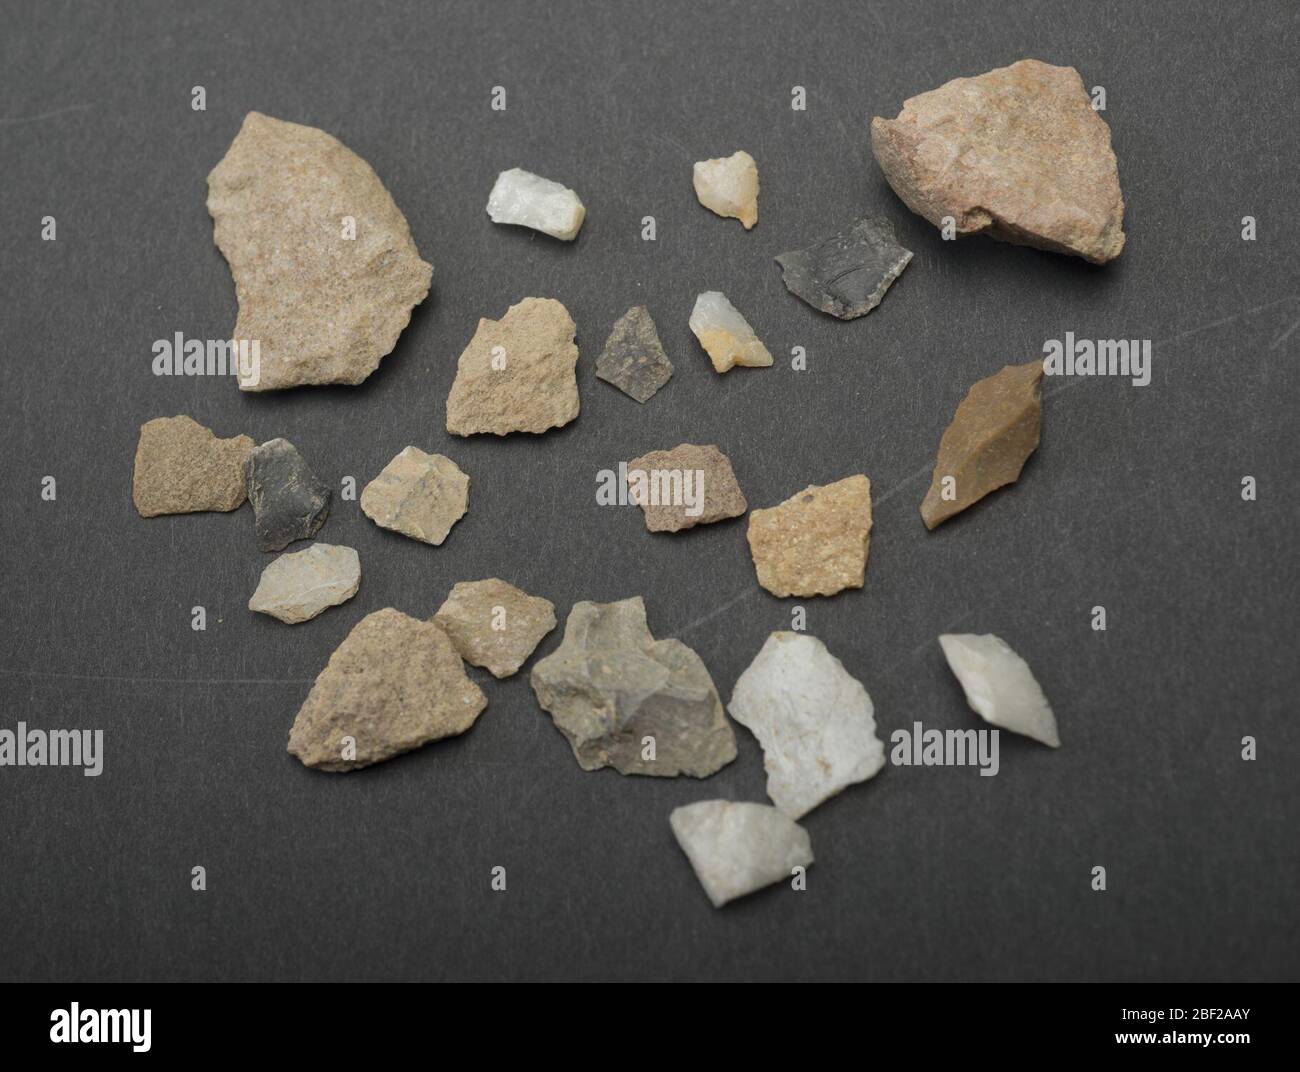 Prehistoric Rocks and Stones Shaped by Human Hands. In the early 1980s, archaeologists excavated land along Howard Road, SE before construction began on the Anacostia Metro Station in southeast Washington, D.C. Objects unearthed in the excavation revealed nearly 10,000 years of human settlement in the area. Stock Photo